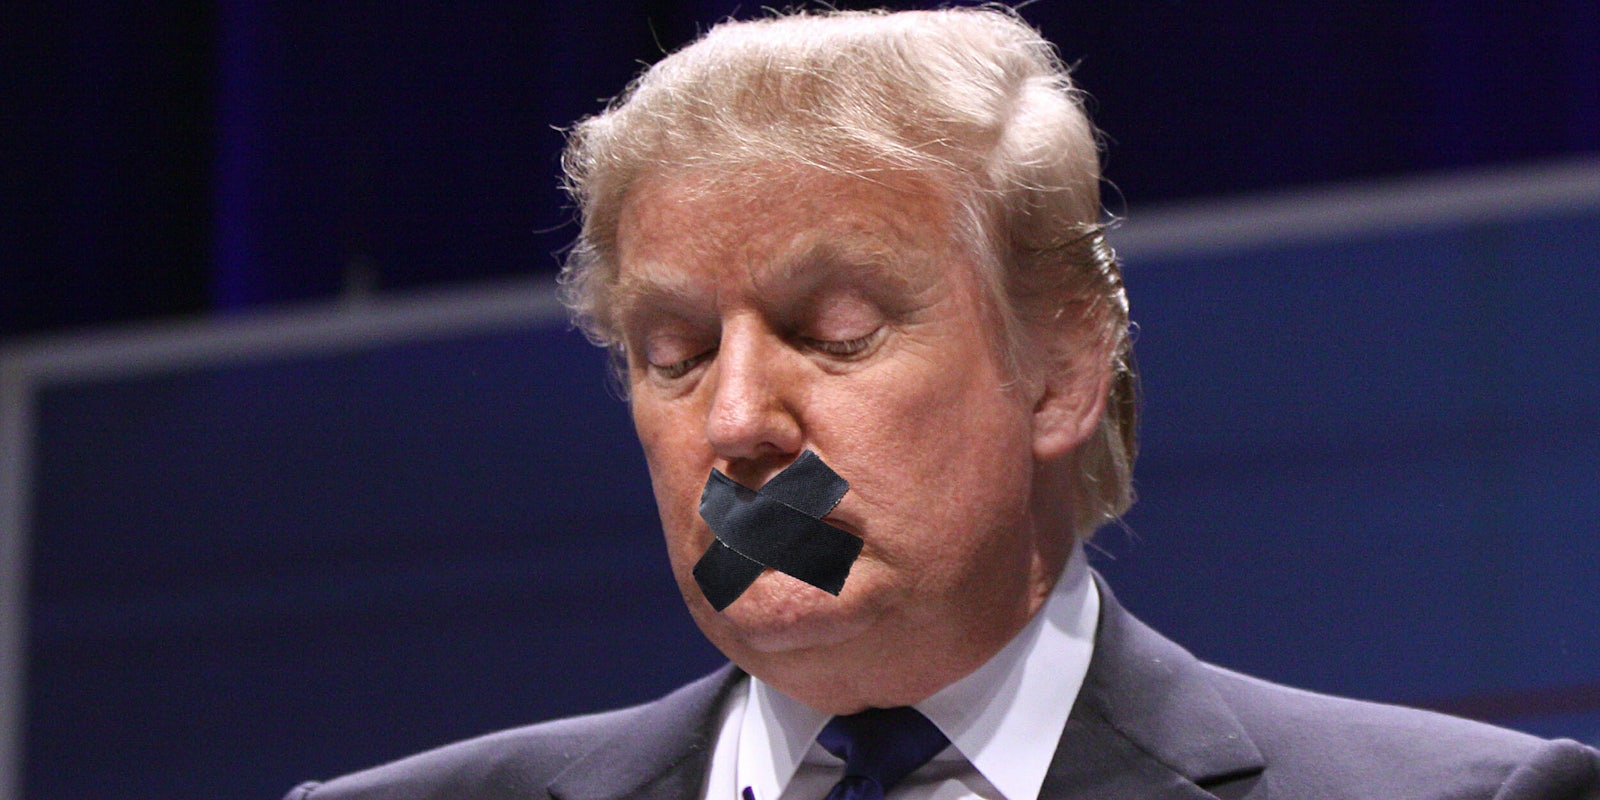 Donald Trump with tape over his mouth